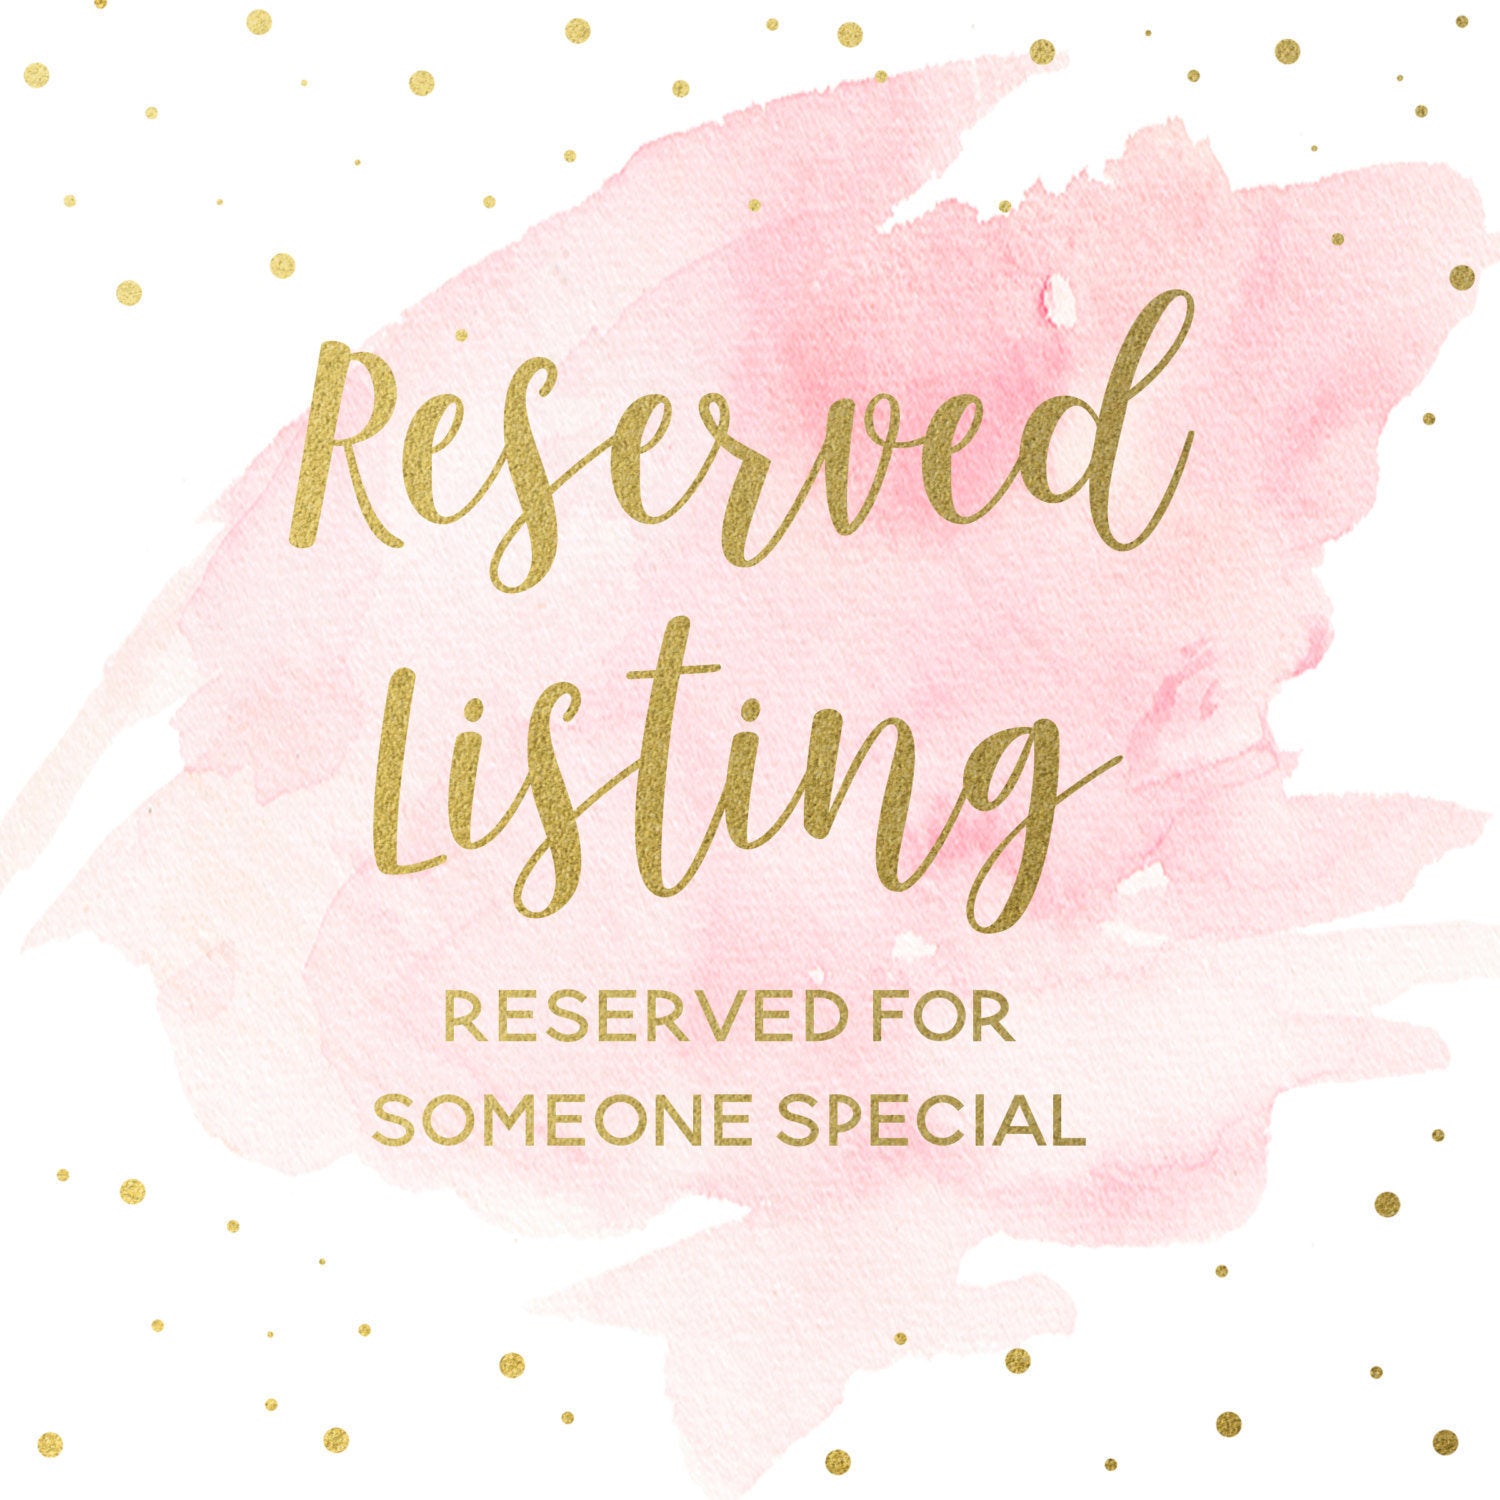 Reserved Listing - Patricia C.